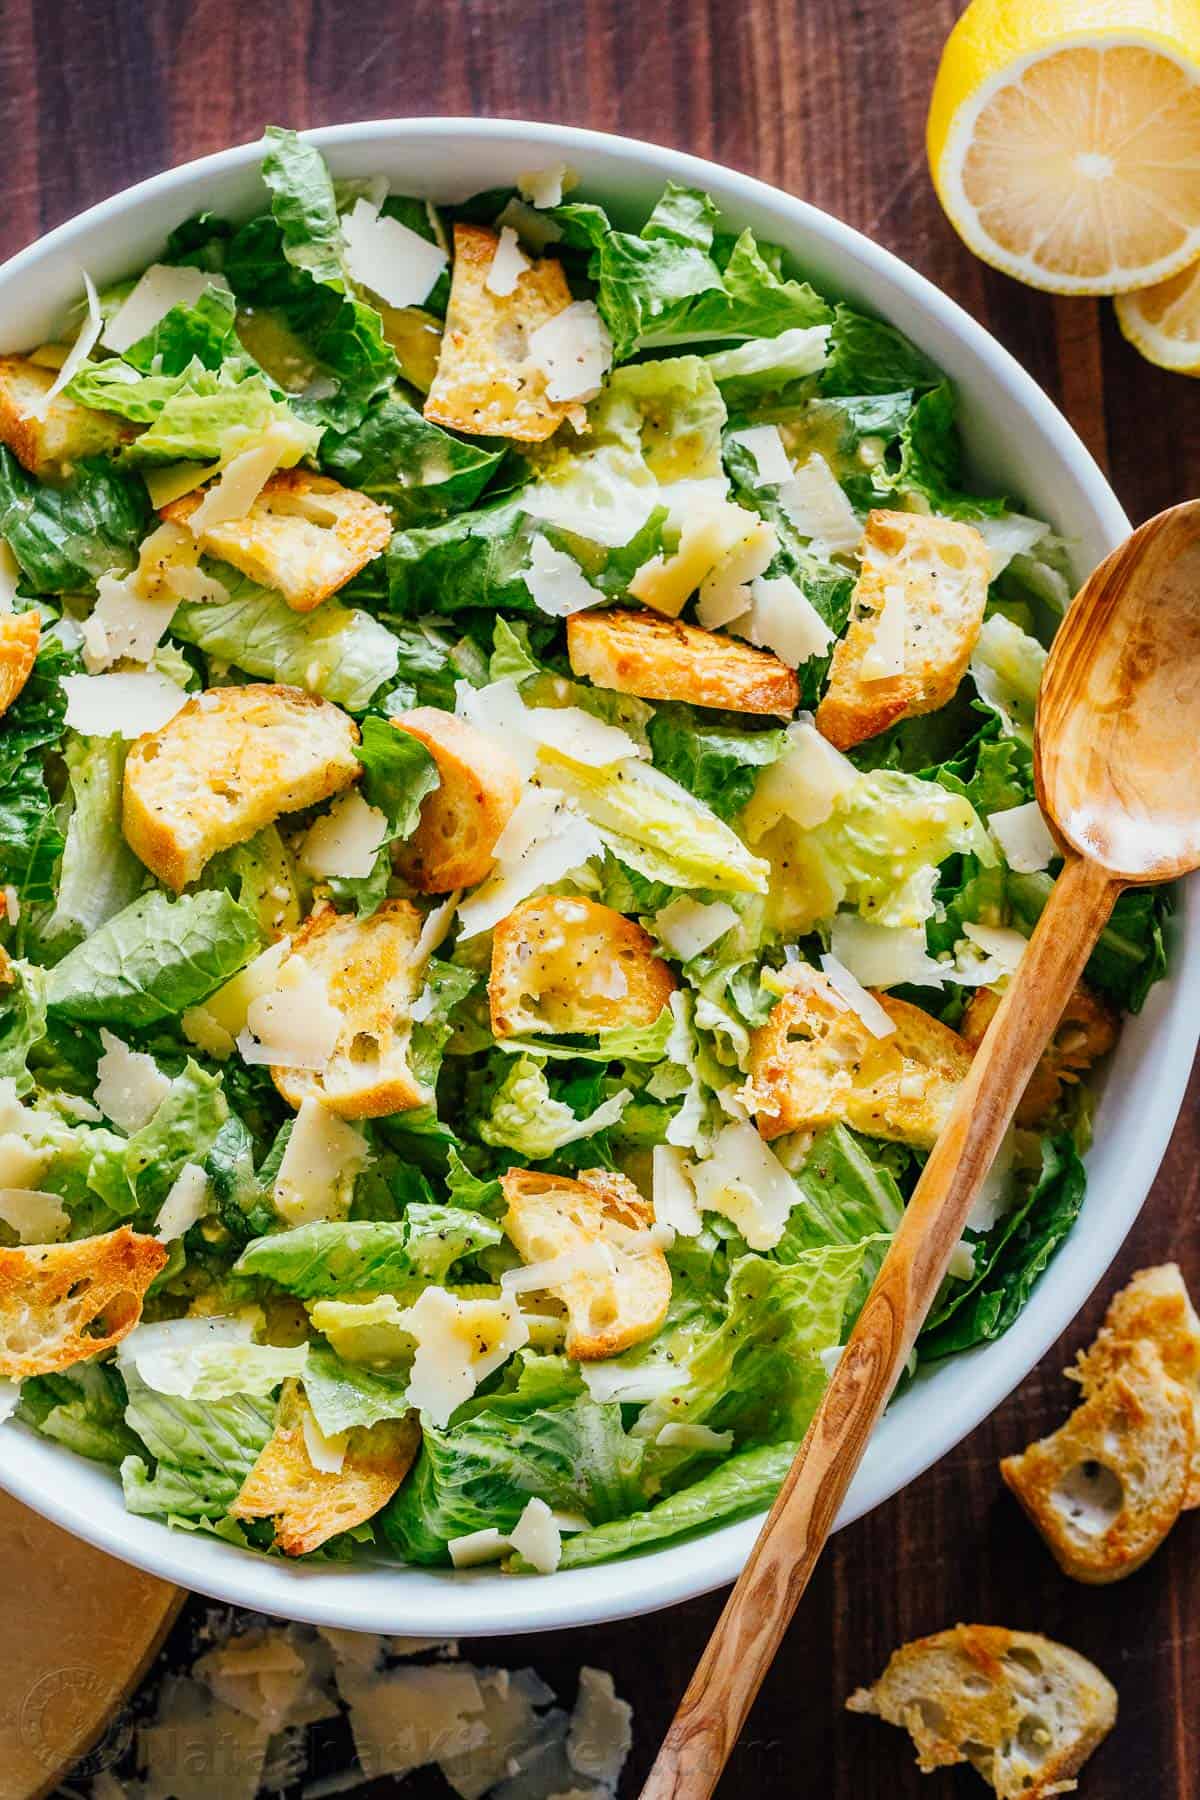 Caesar salad in a large plate with a wooden spoon.